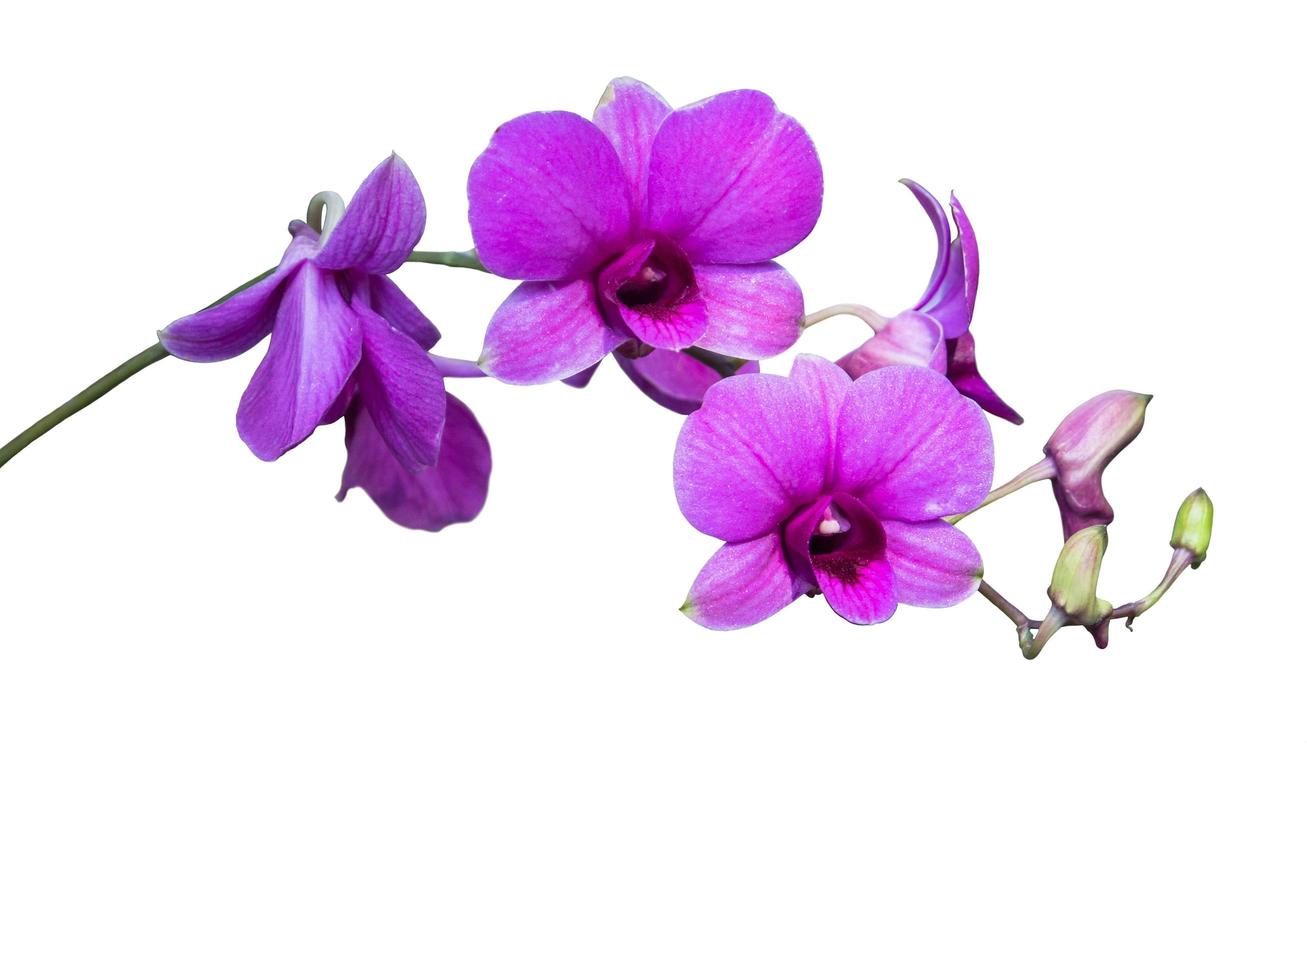 Purple dwarf or mini orchid with a bunch of blooming flowers, Phalaenopsis calimero, Isolate on white background photo